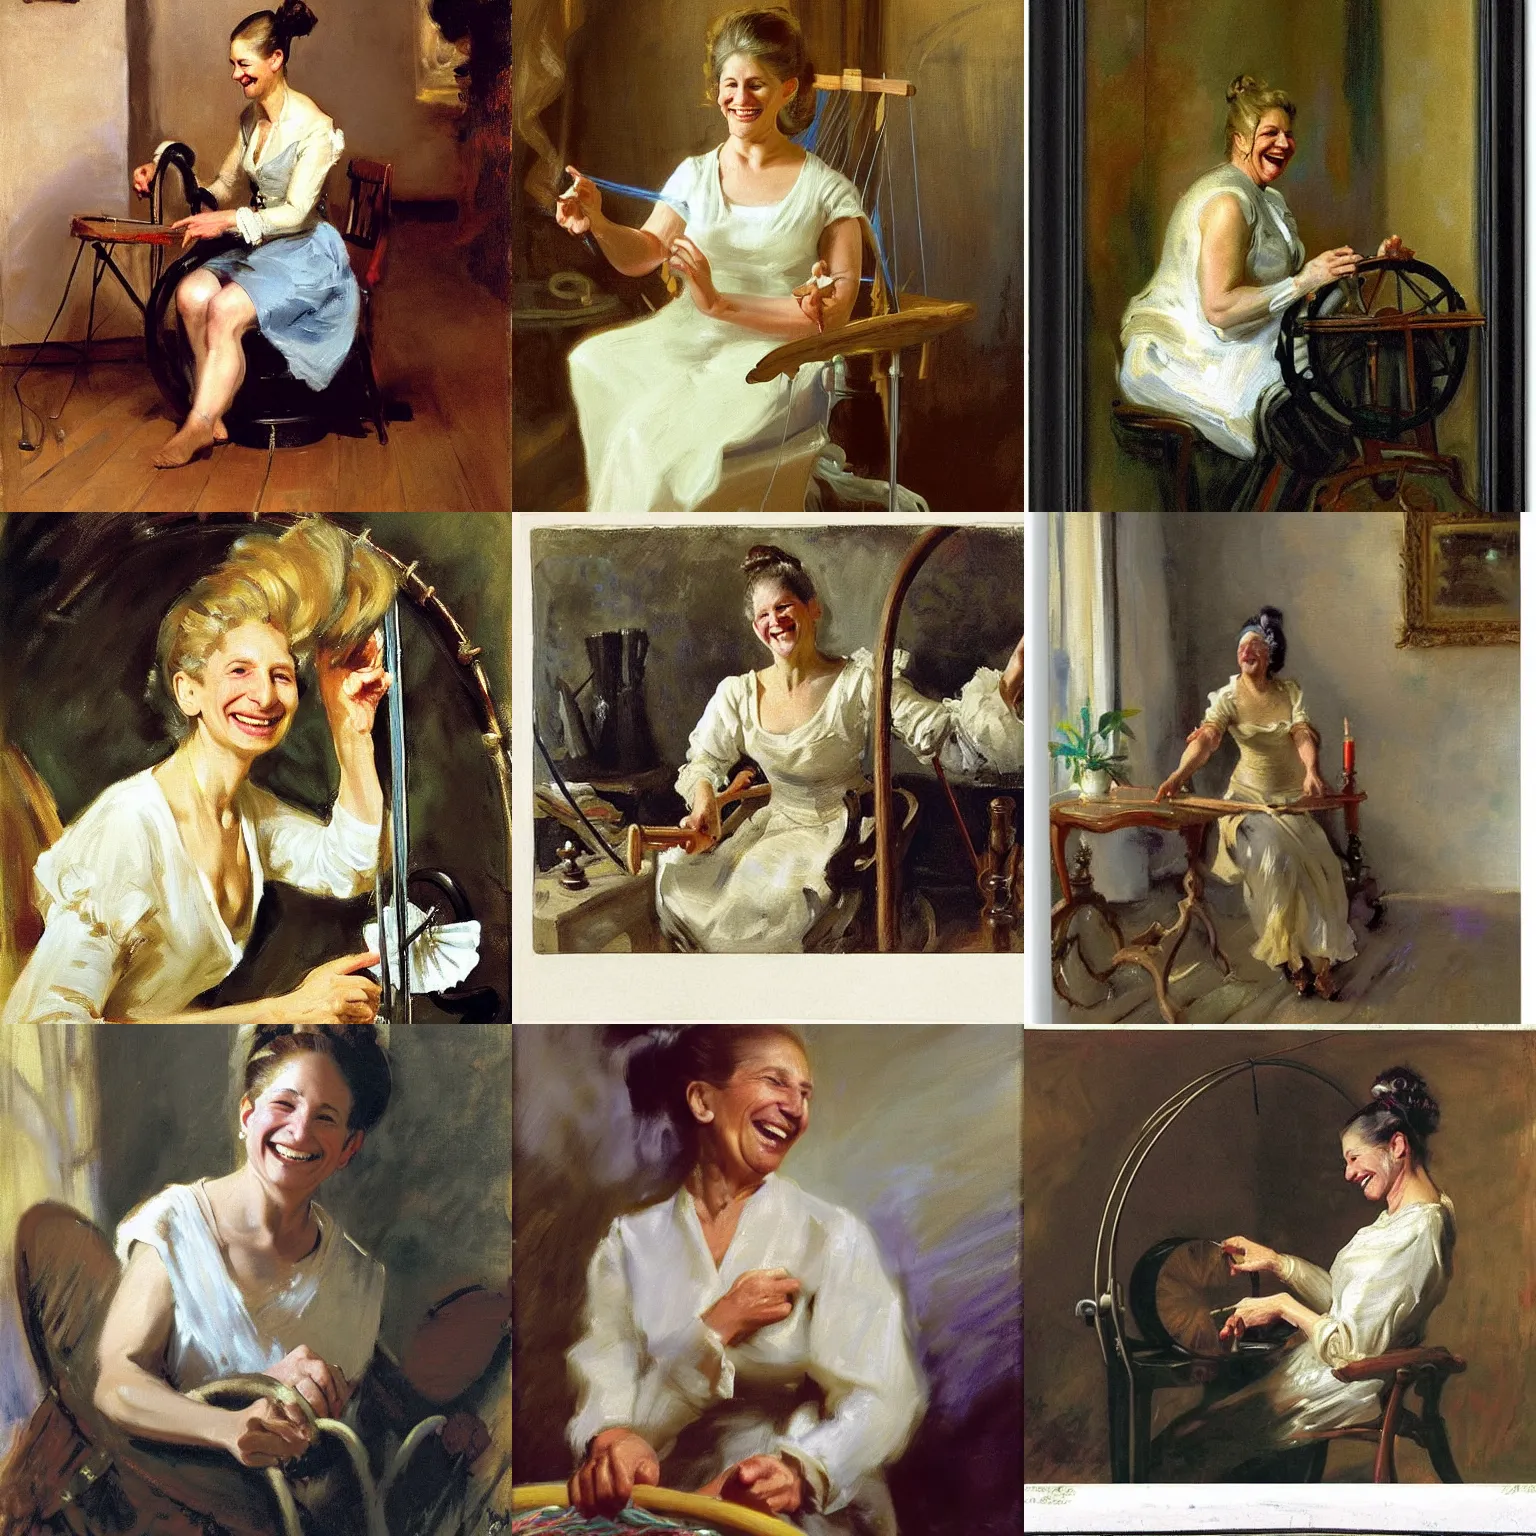 Prompt: A 50 year old woman with hair in a bun who looks like Barbara Streisand, is spinning yarn on a spinning wheel, smiling, happy, content, by john singer sargent